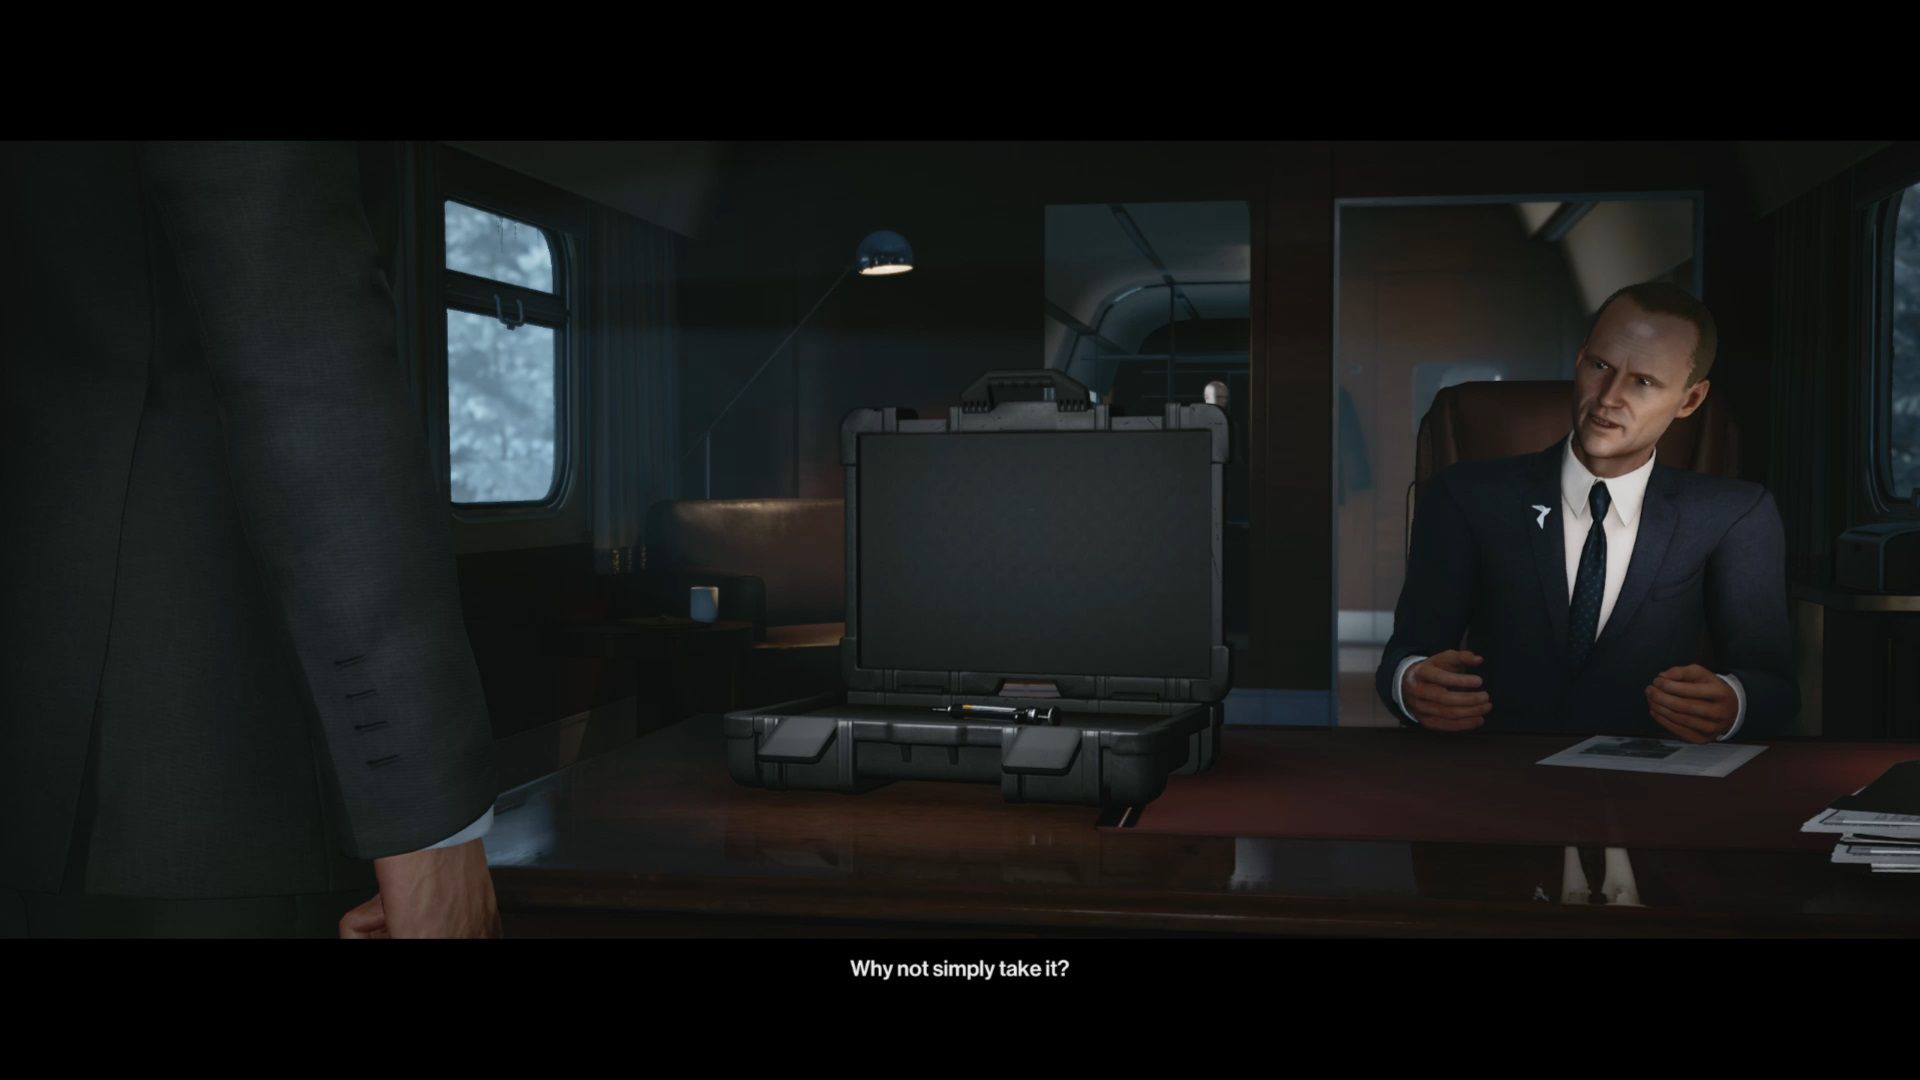 The ending scene of Hitman 3's final level, where Agent 47 is asked to pick up a syringe